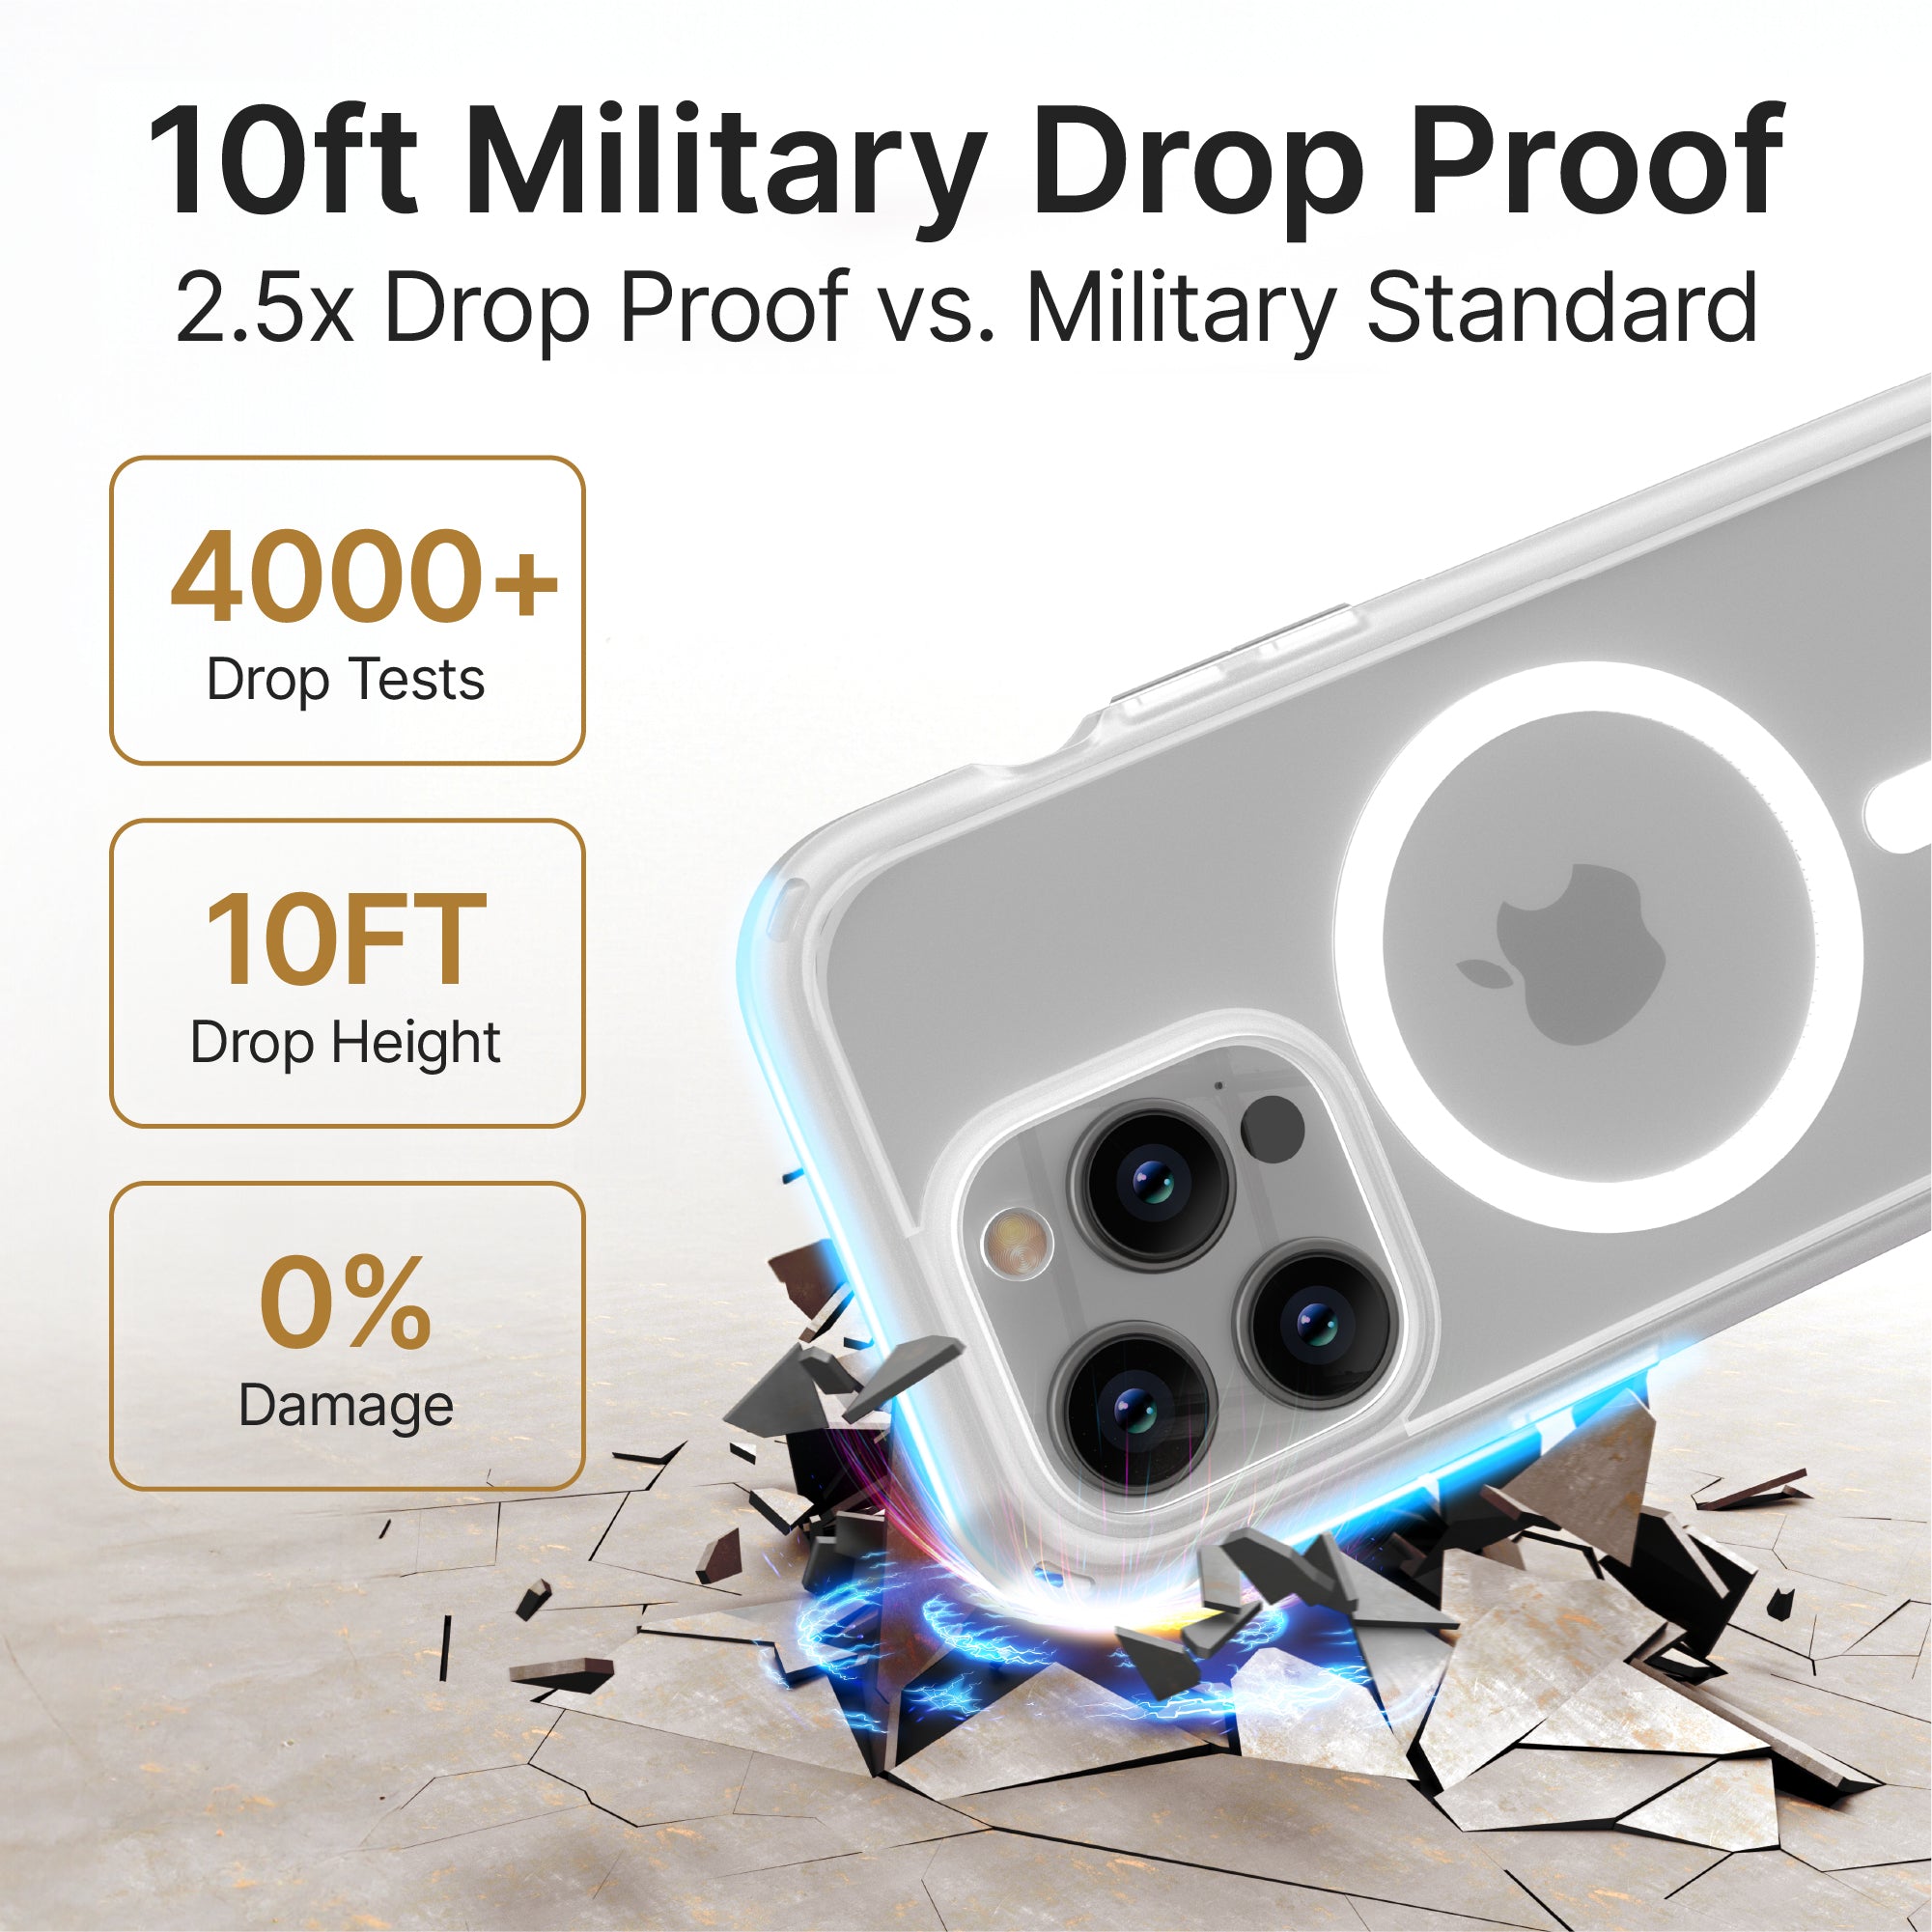 catalyst iphone 15 series influence case magsafe compatible clear for iphone 15 pro max with cracked floor text reads 10ft military drop proof 2.5x drop proof vs military standard 4000+ drop tests 10ft drop height 0% damage